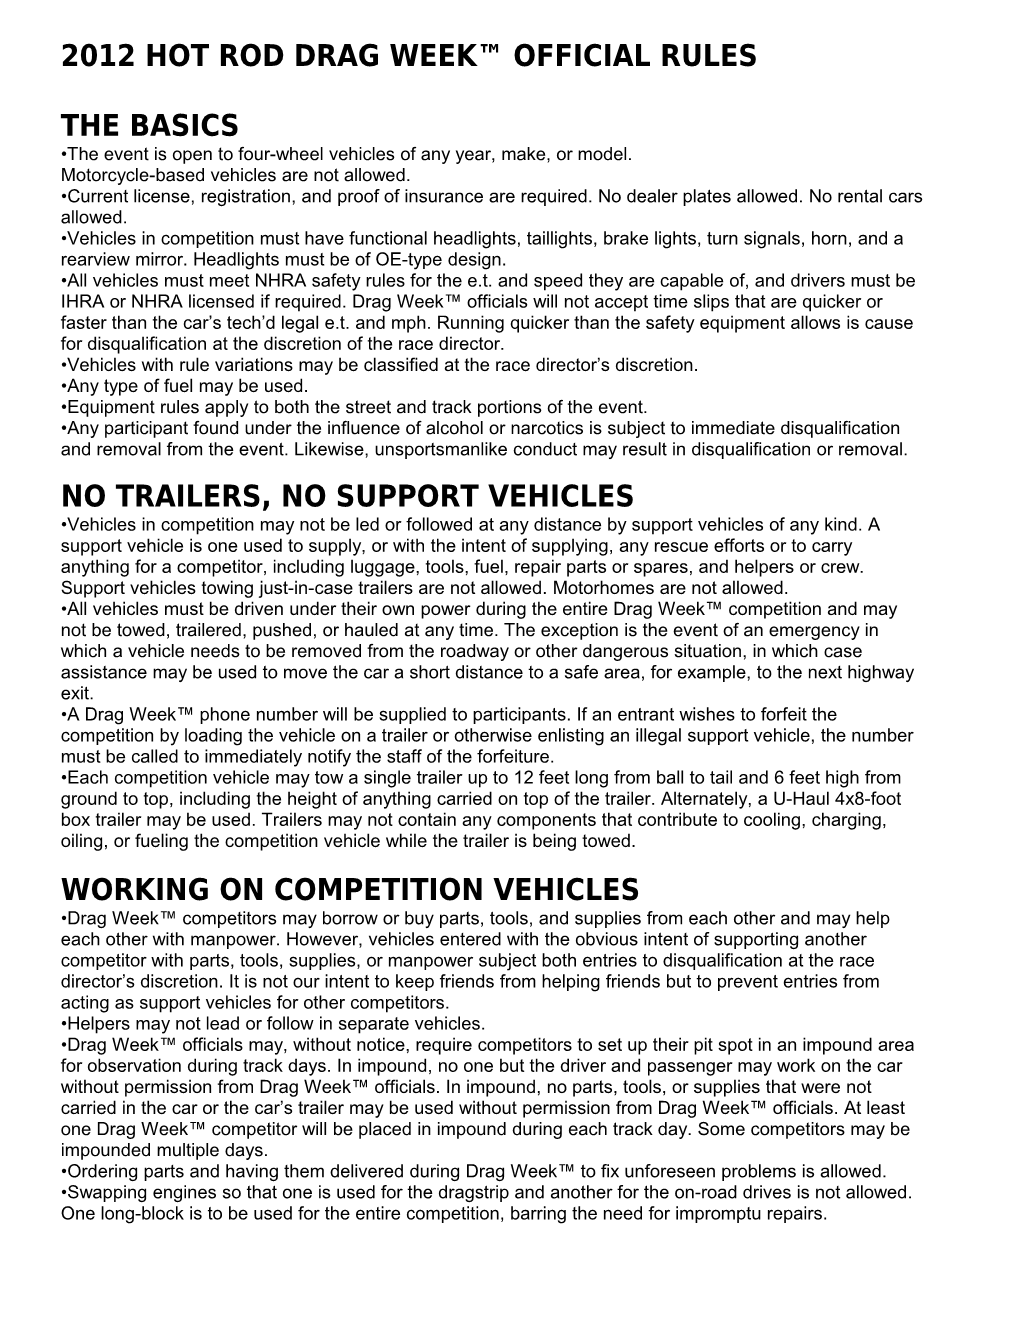 2012 Hot Rod Drag Week Official Rules